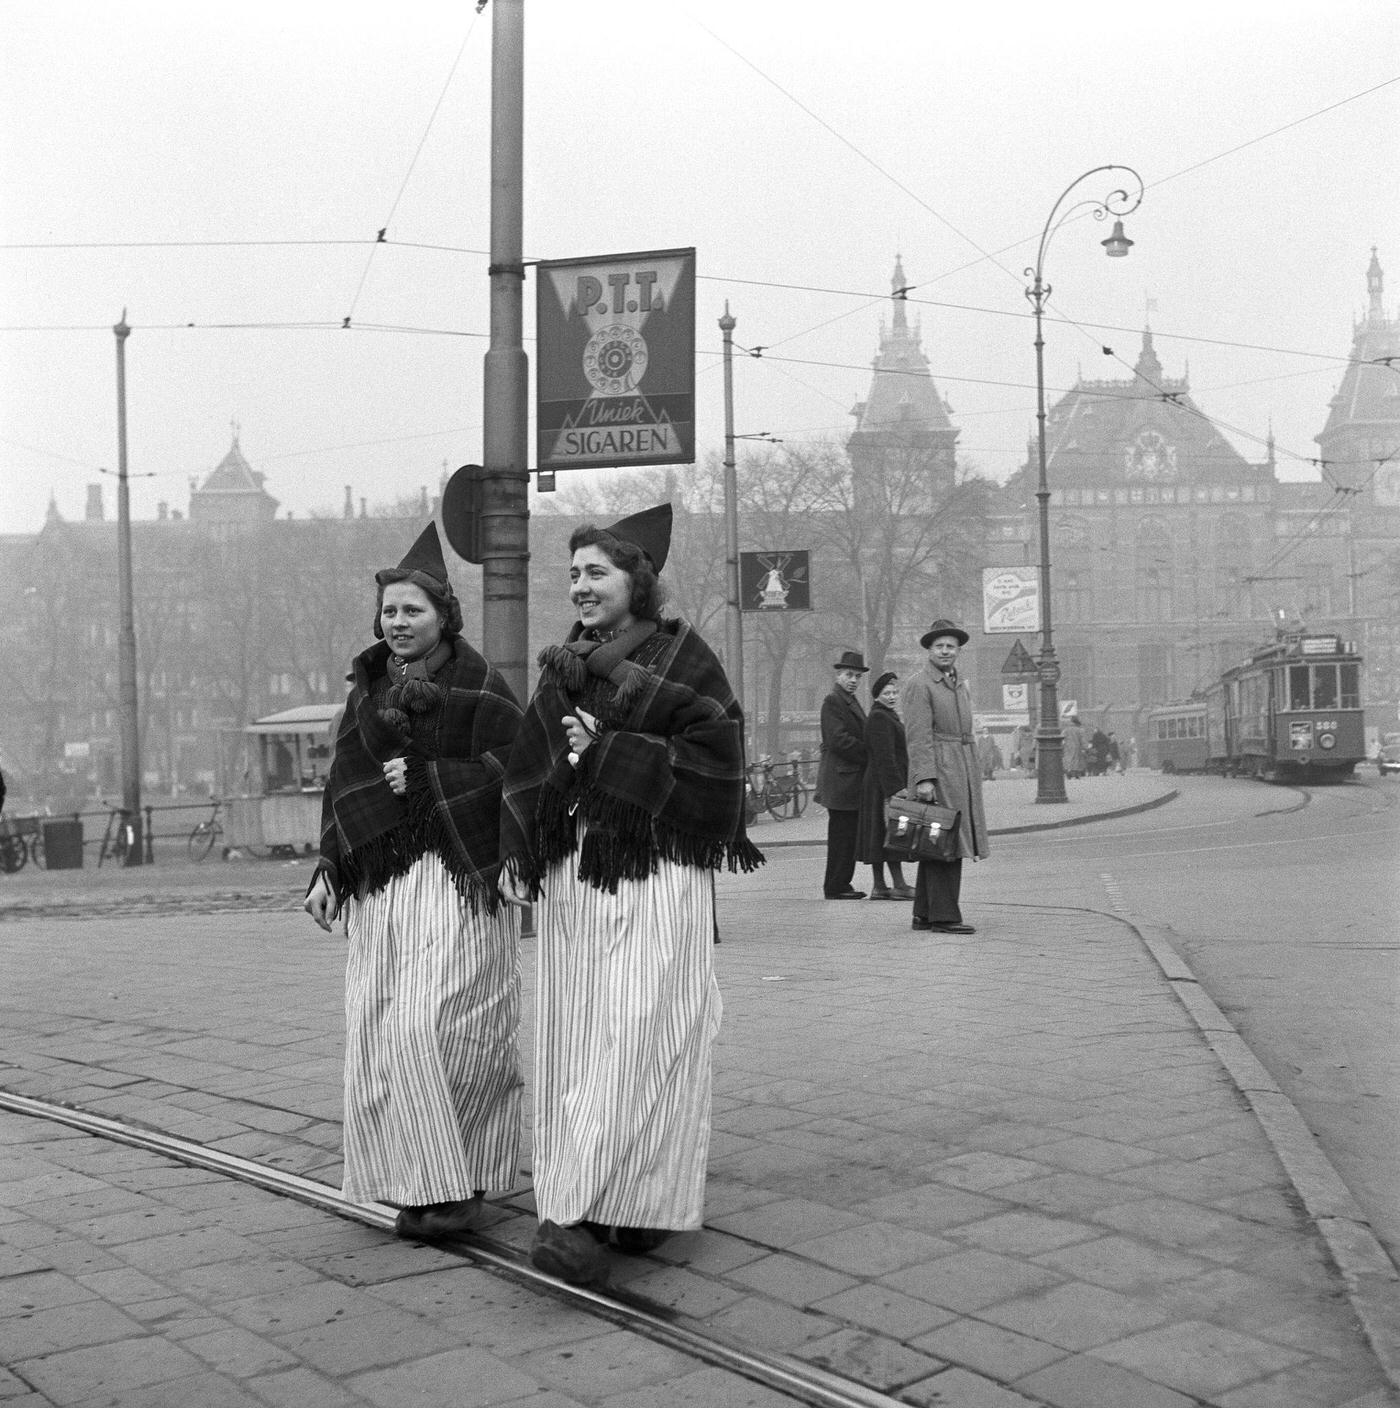 Two young Dutch women walking near the central station, Amsterdam, the Netherlands, 1954.